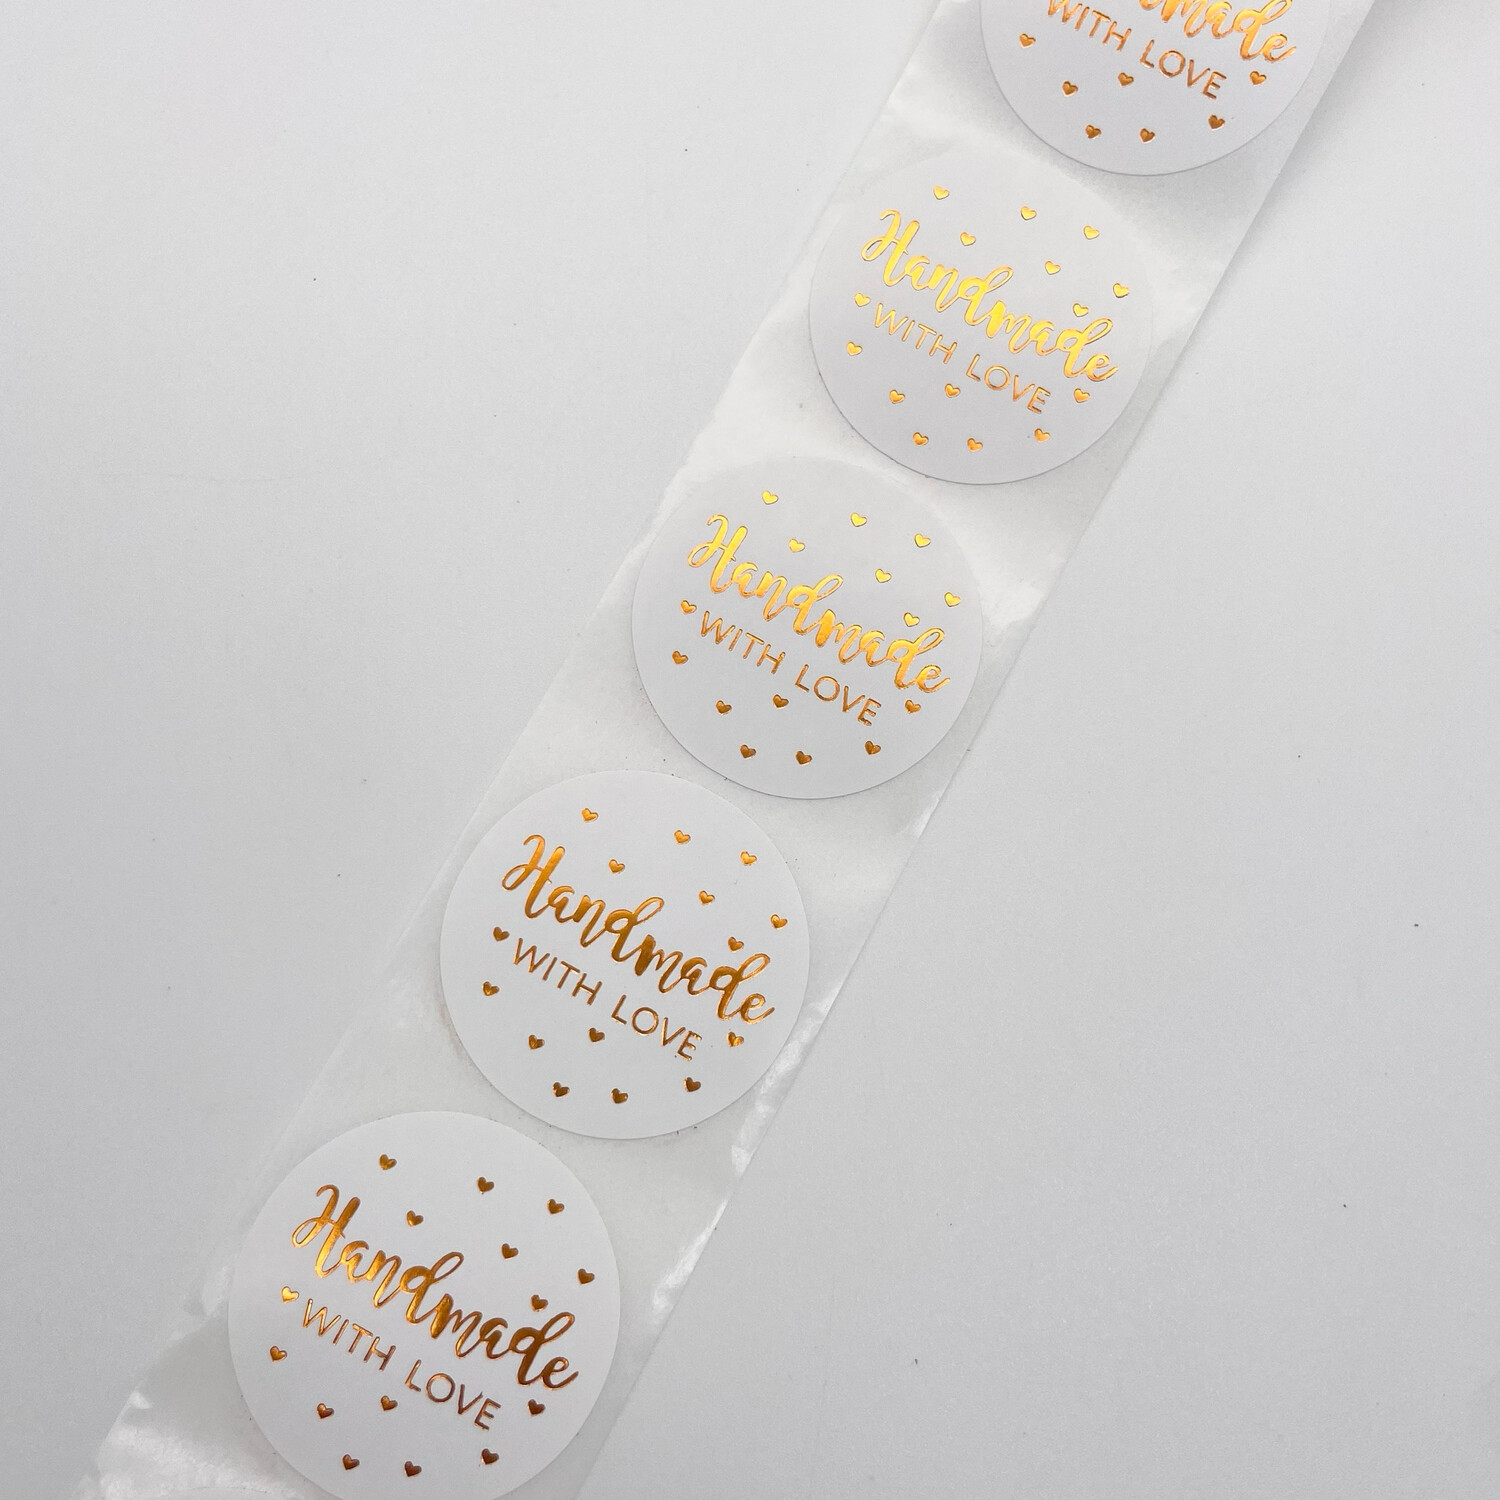 Handmade With Love Stickers Labels - 25 per pack